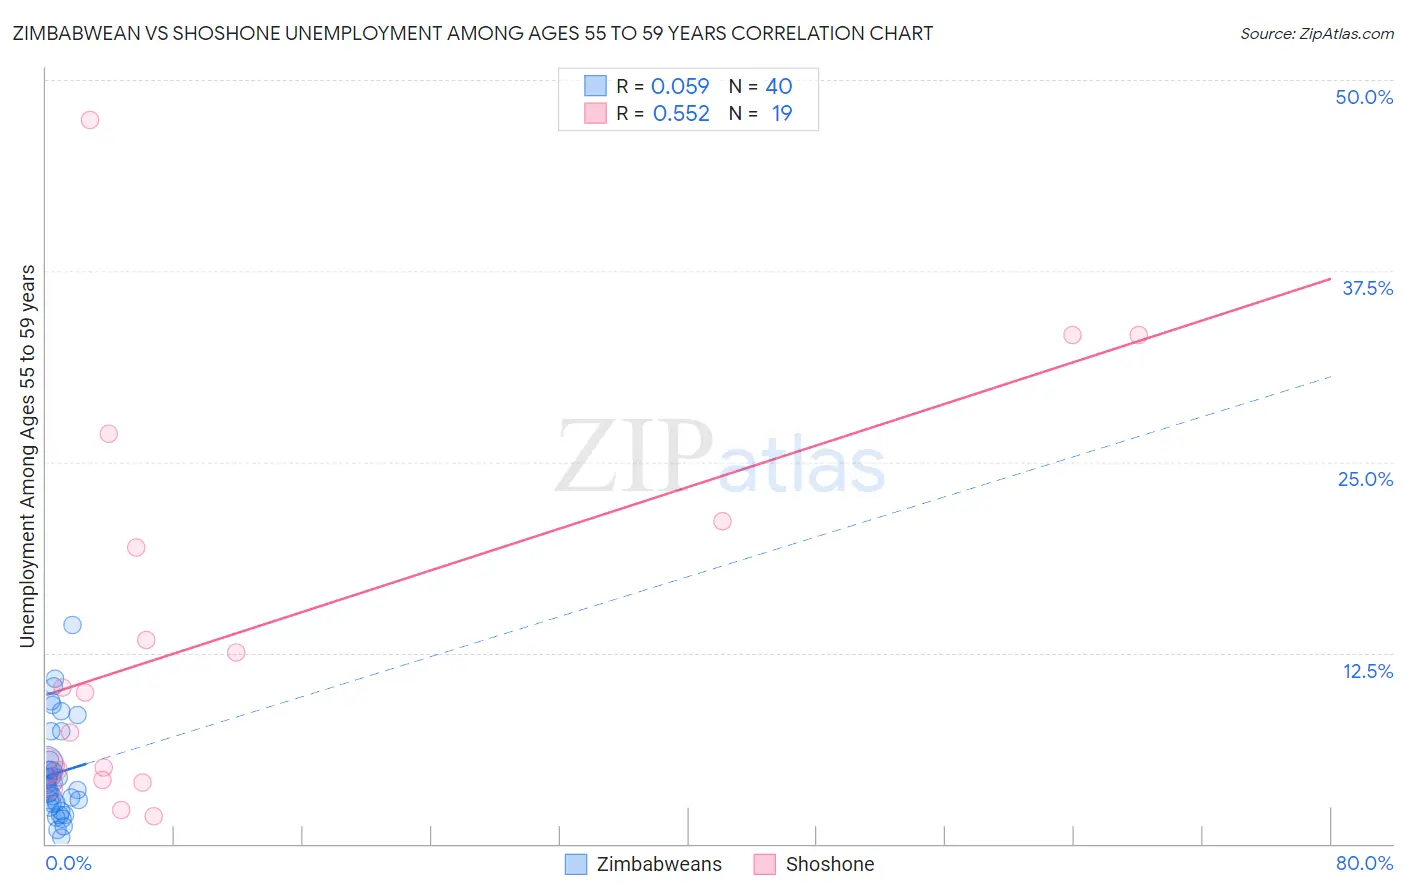 Zimbabwean vs Shoshone Unemployment Among Ages 55 to 59 years